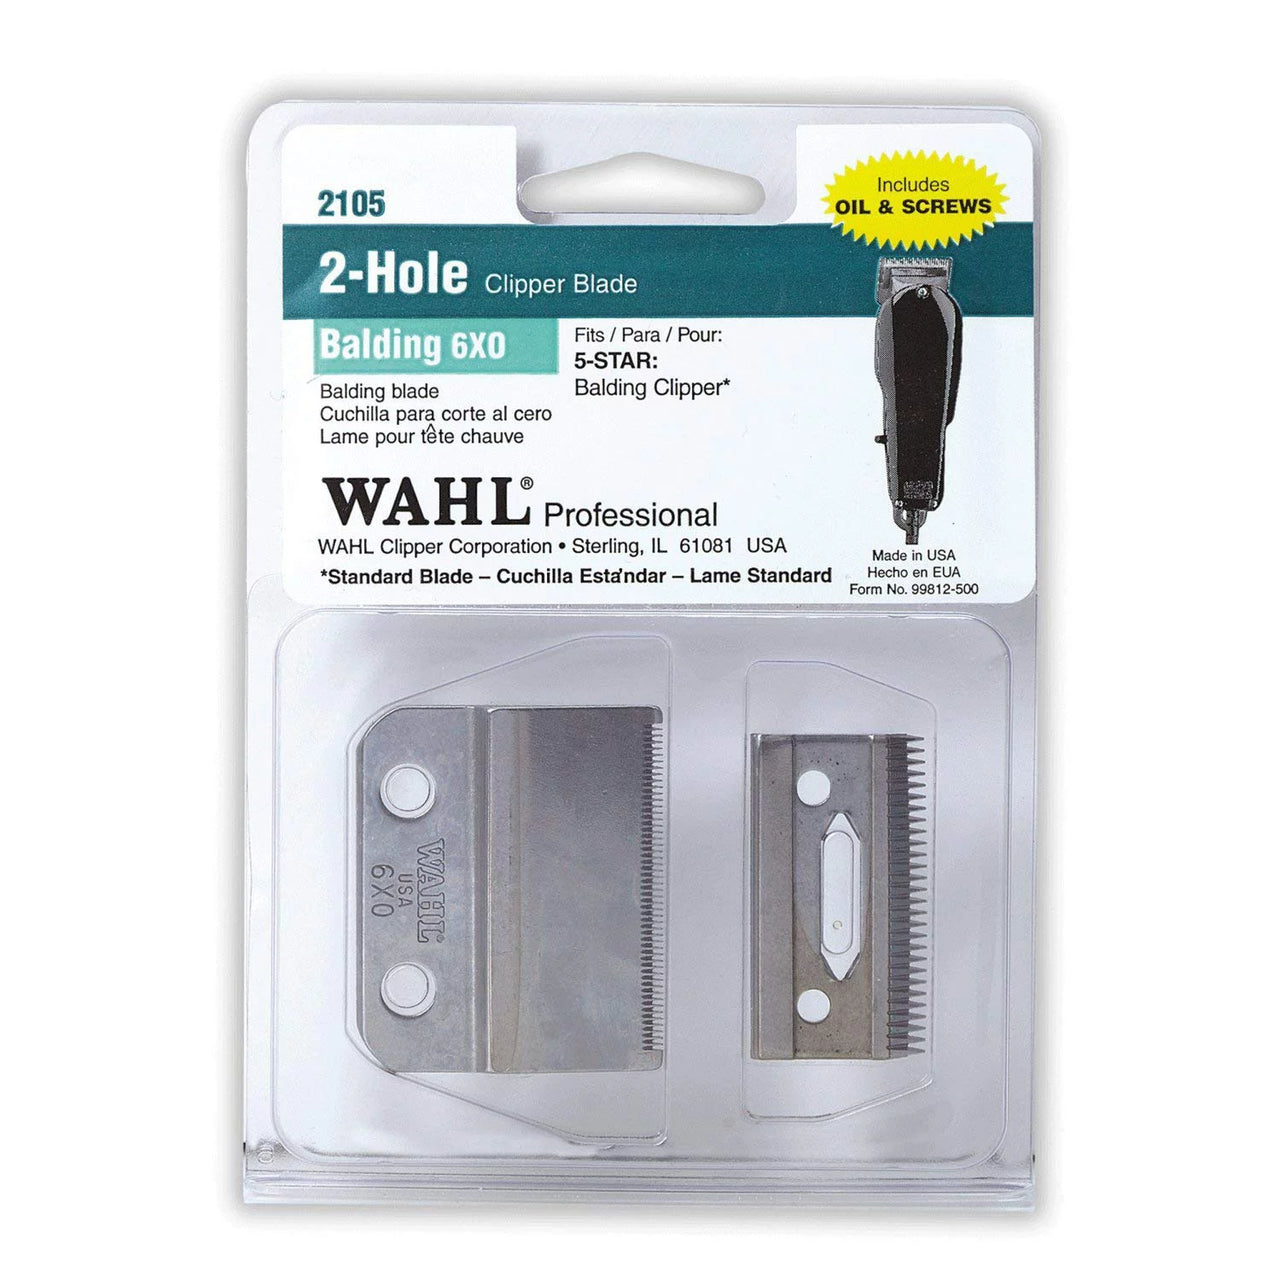 Wahl Balding Blade 2105 Professional-Grade Designed to Provide an Ultra Close Shave